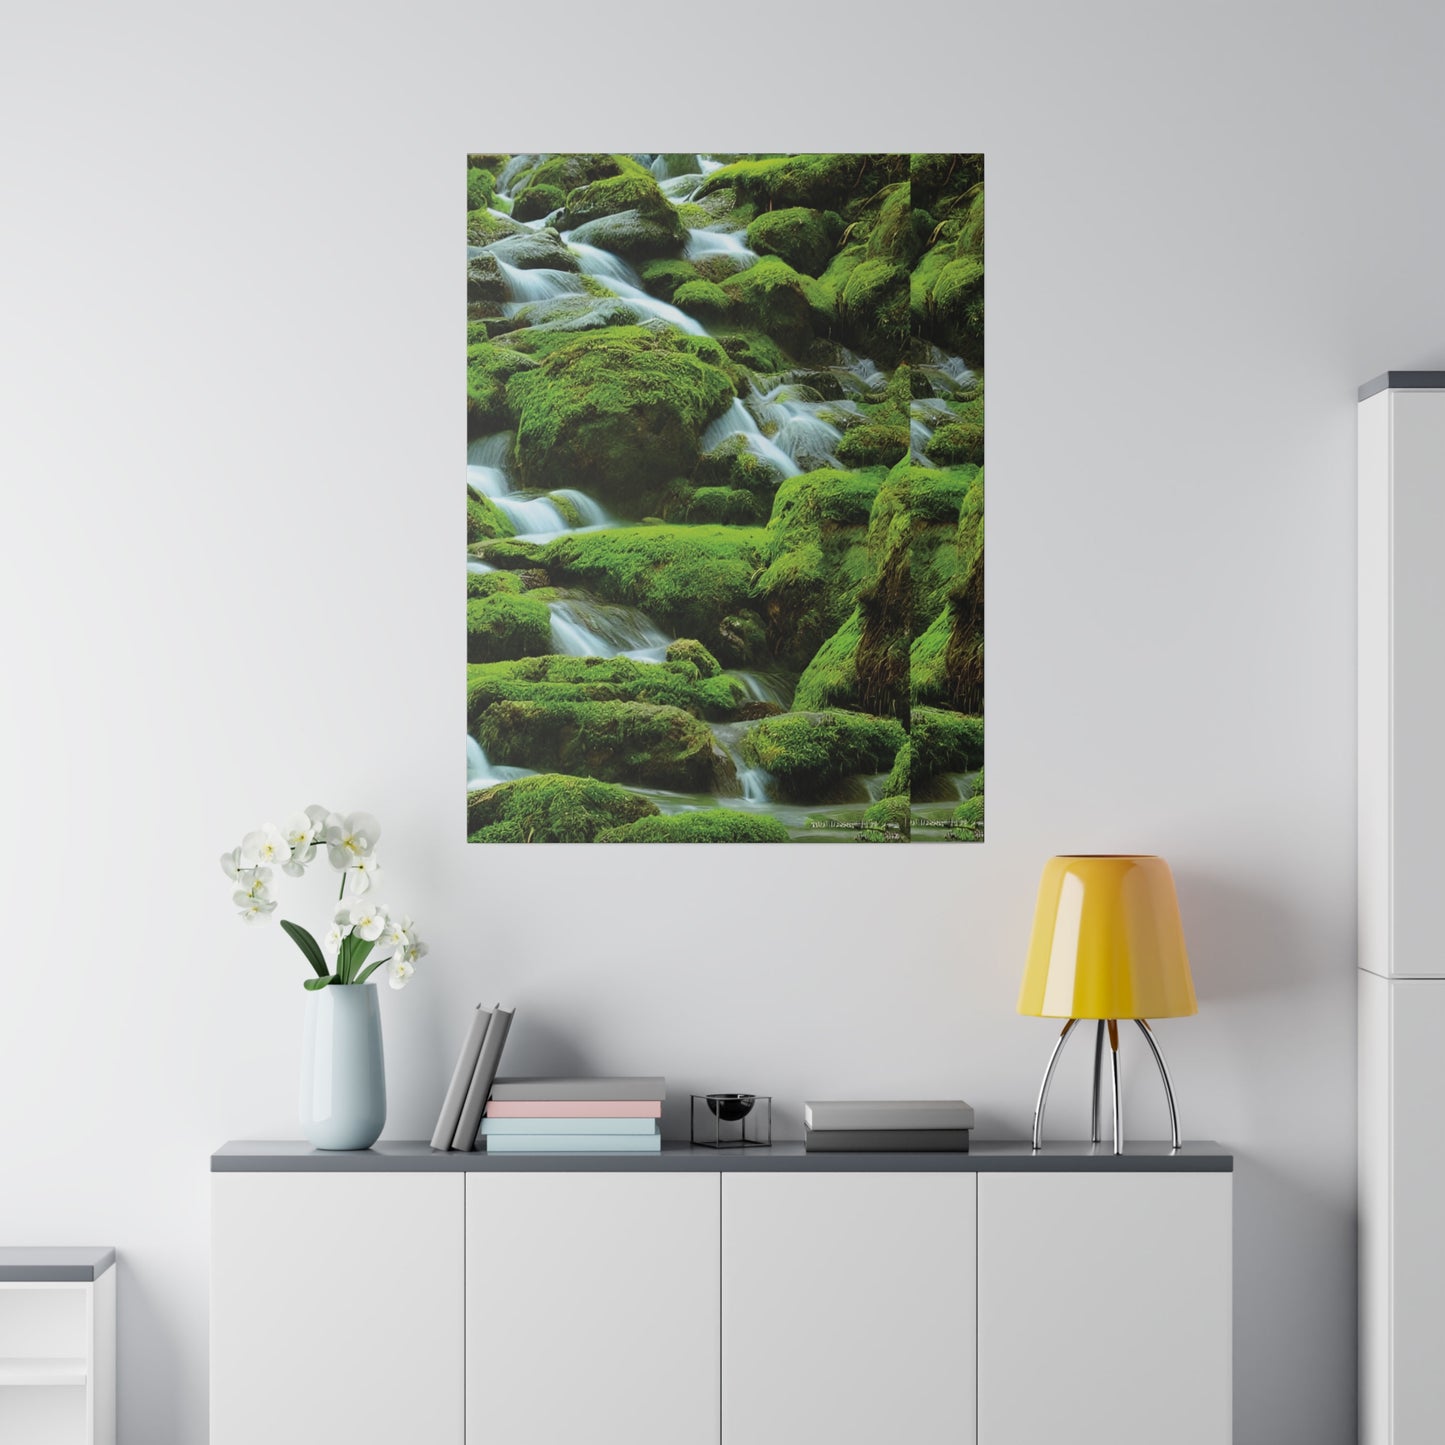  Immerse your space in Colombian allure with custom canvas art. Ethically crafted, blend the vibrant Amazon and Inca heritage to curate a unique wall masterpiece.